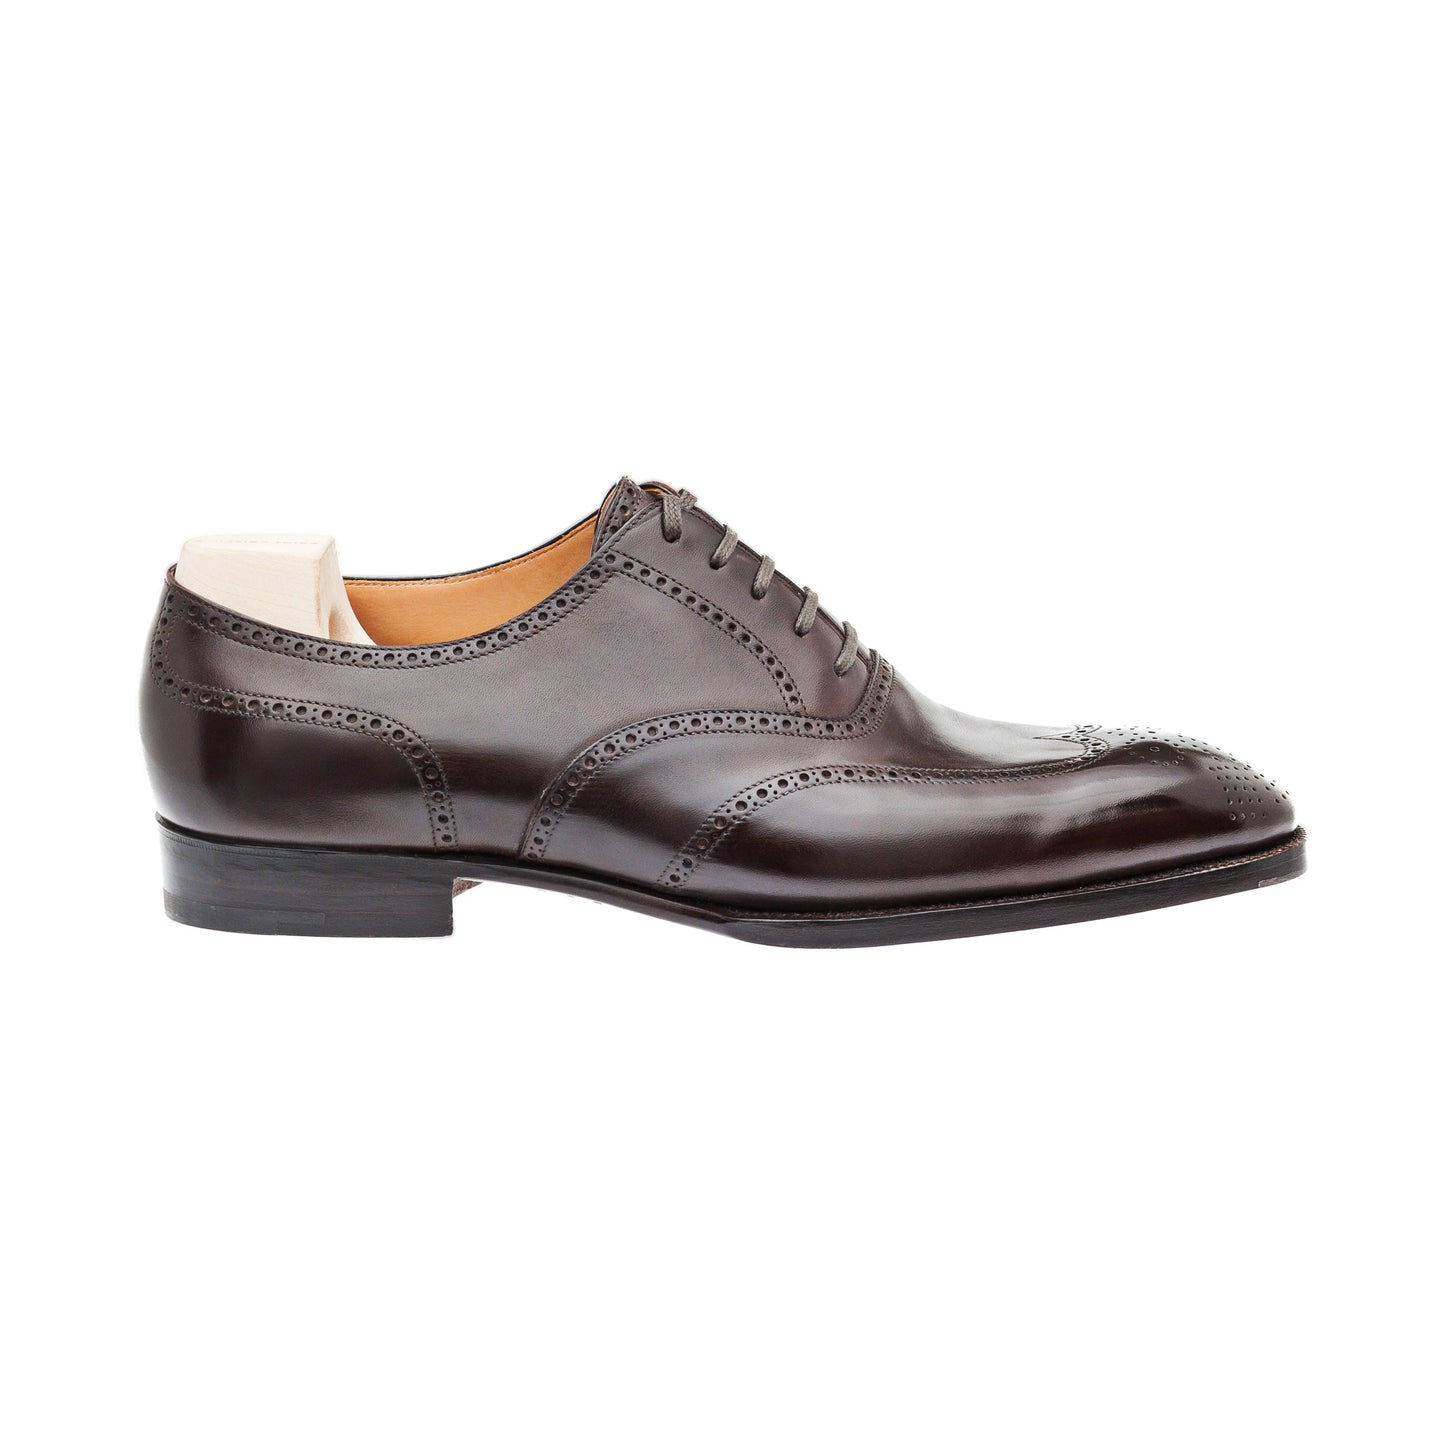 Wing tip perforated dress Oxford